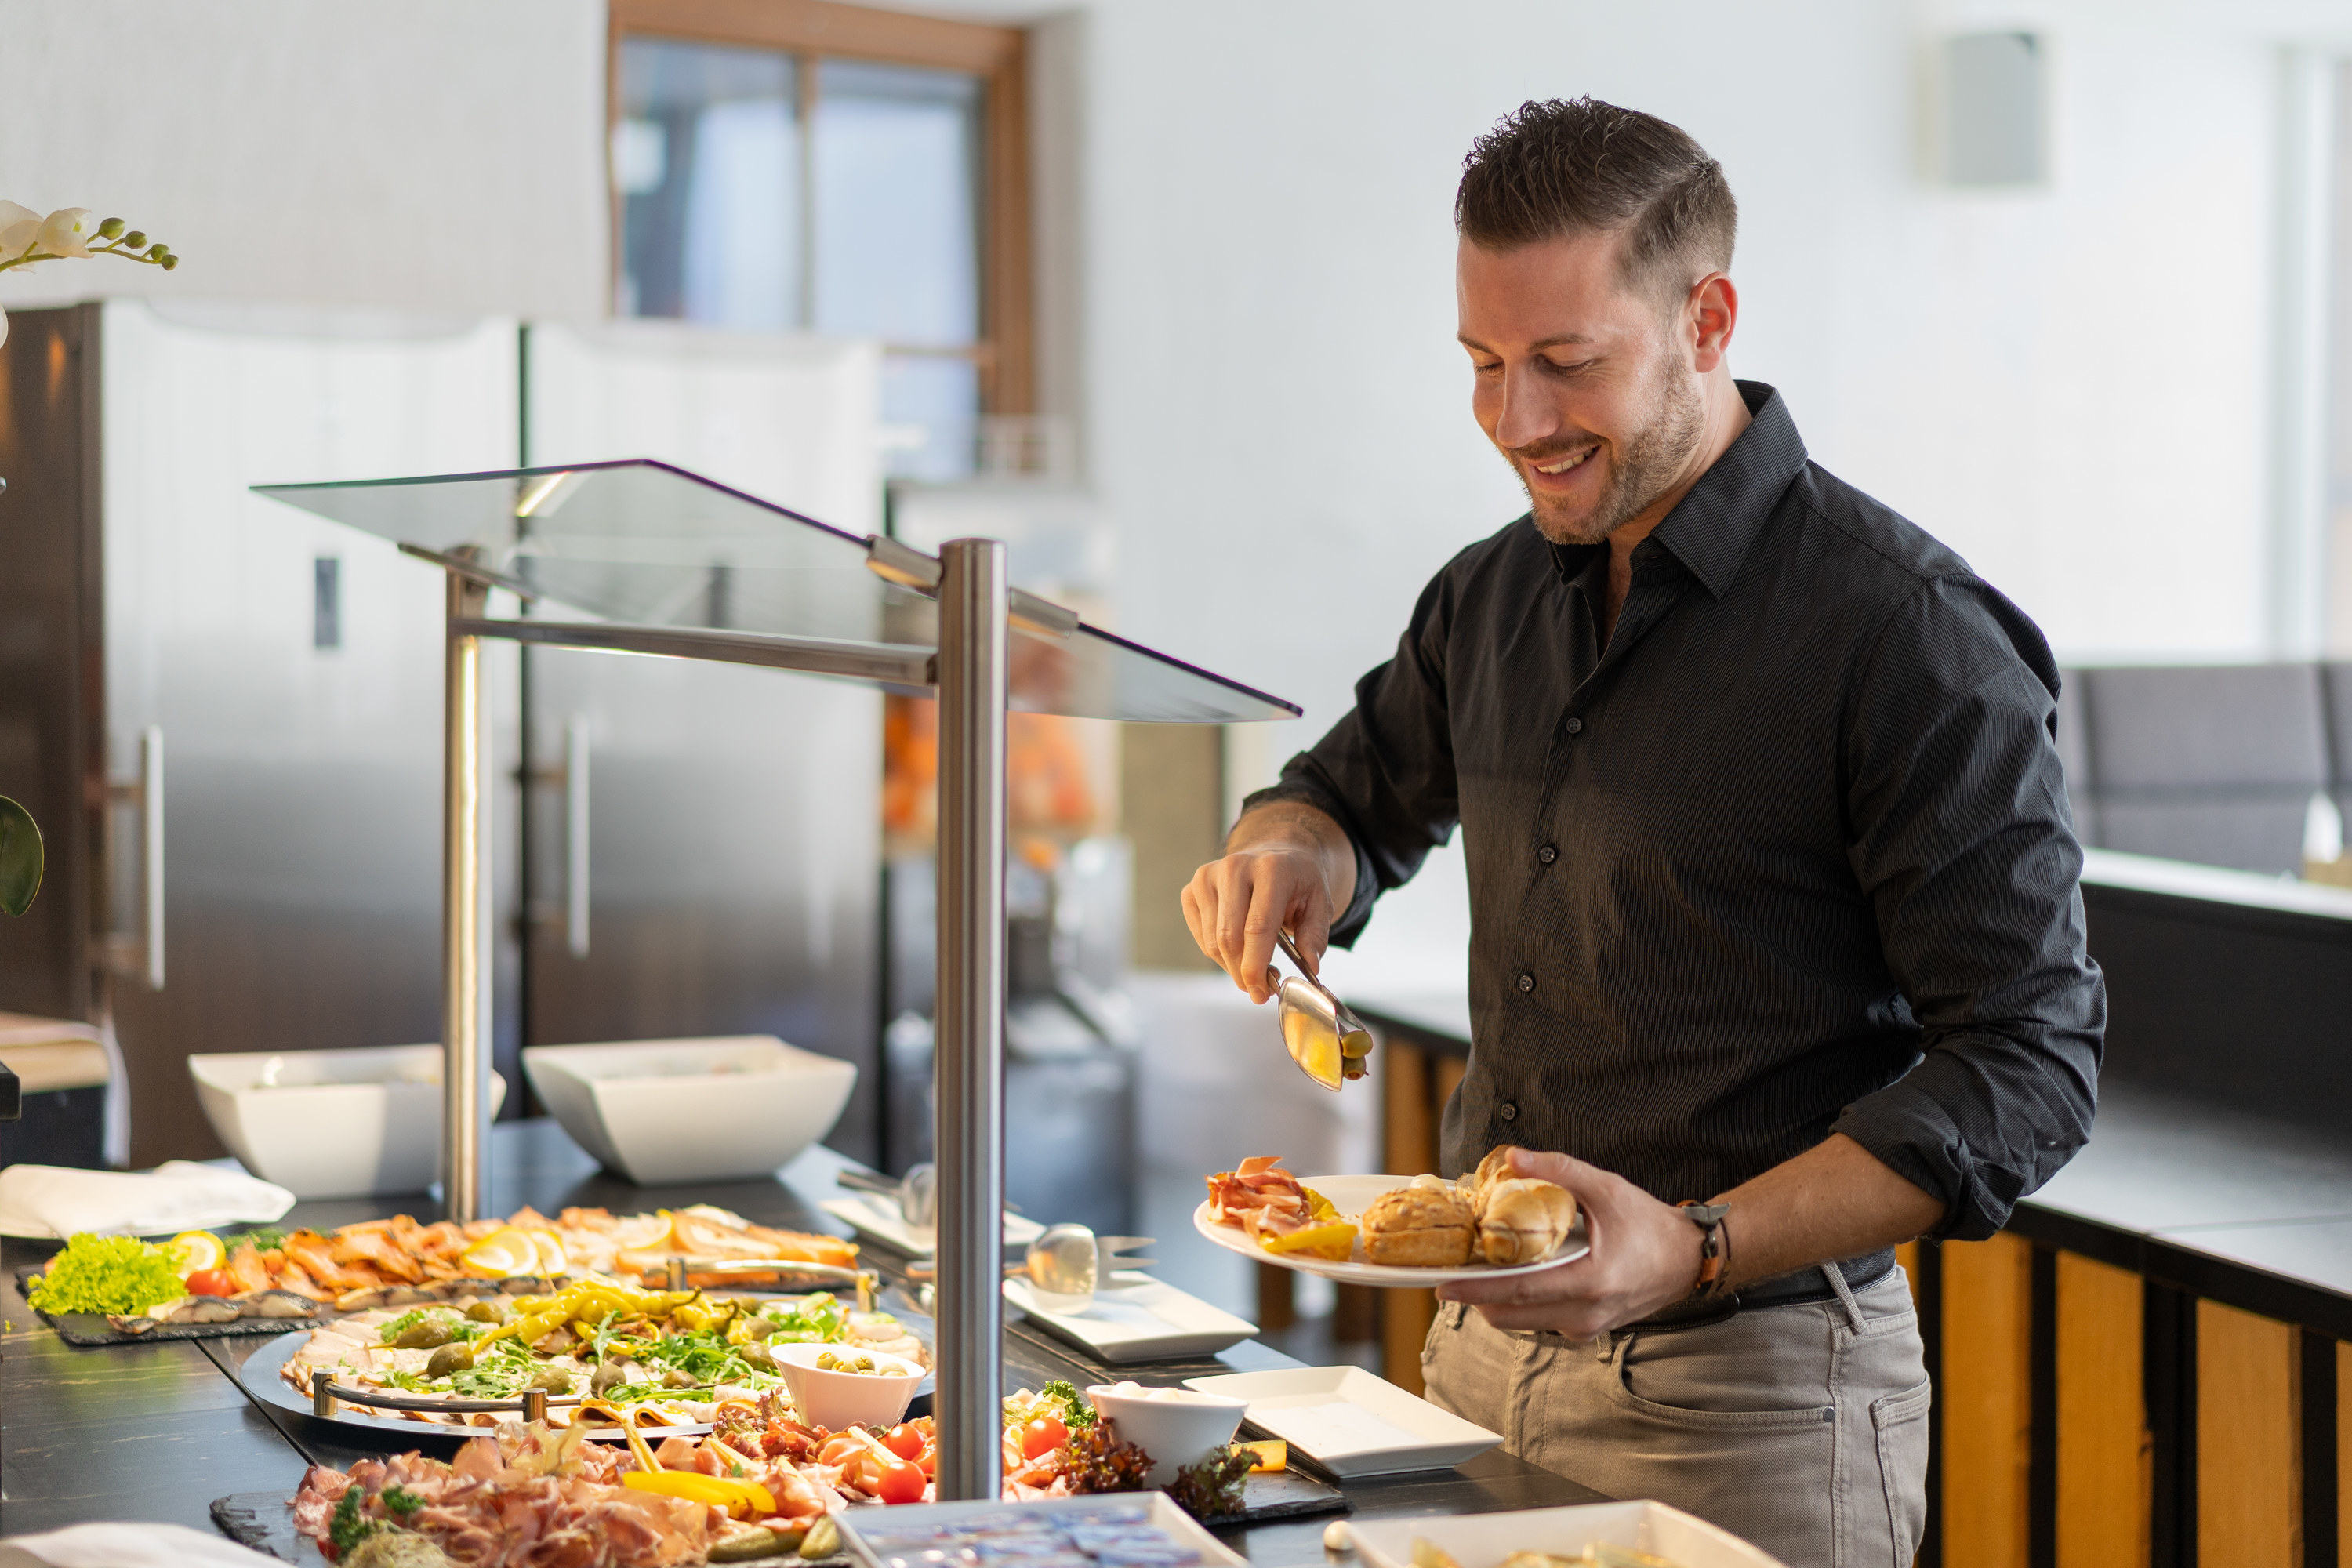 A man filling up his plate at a buffet